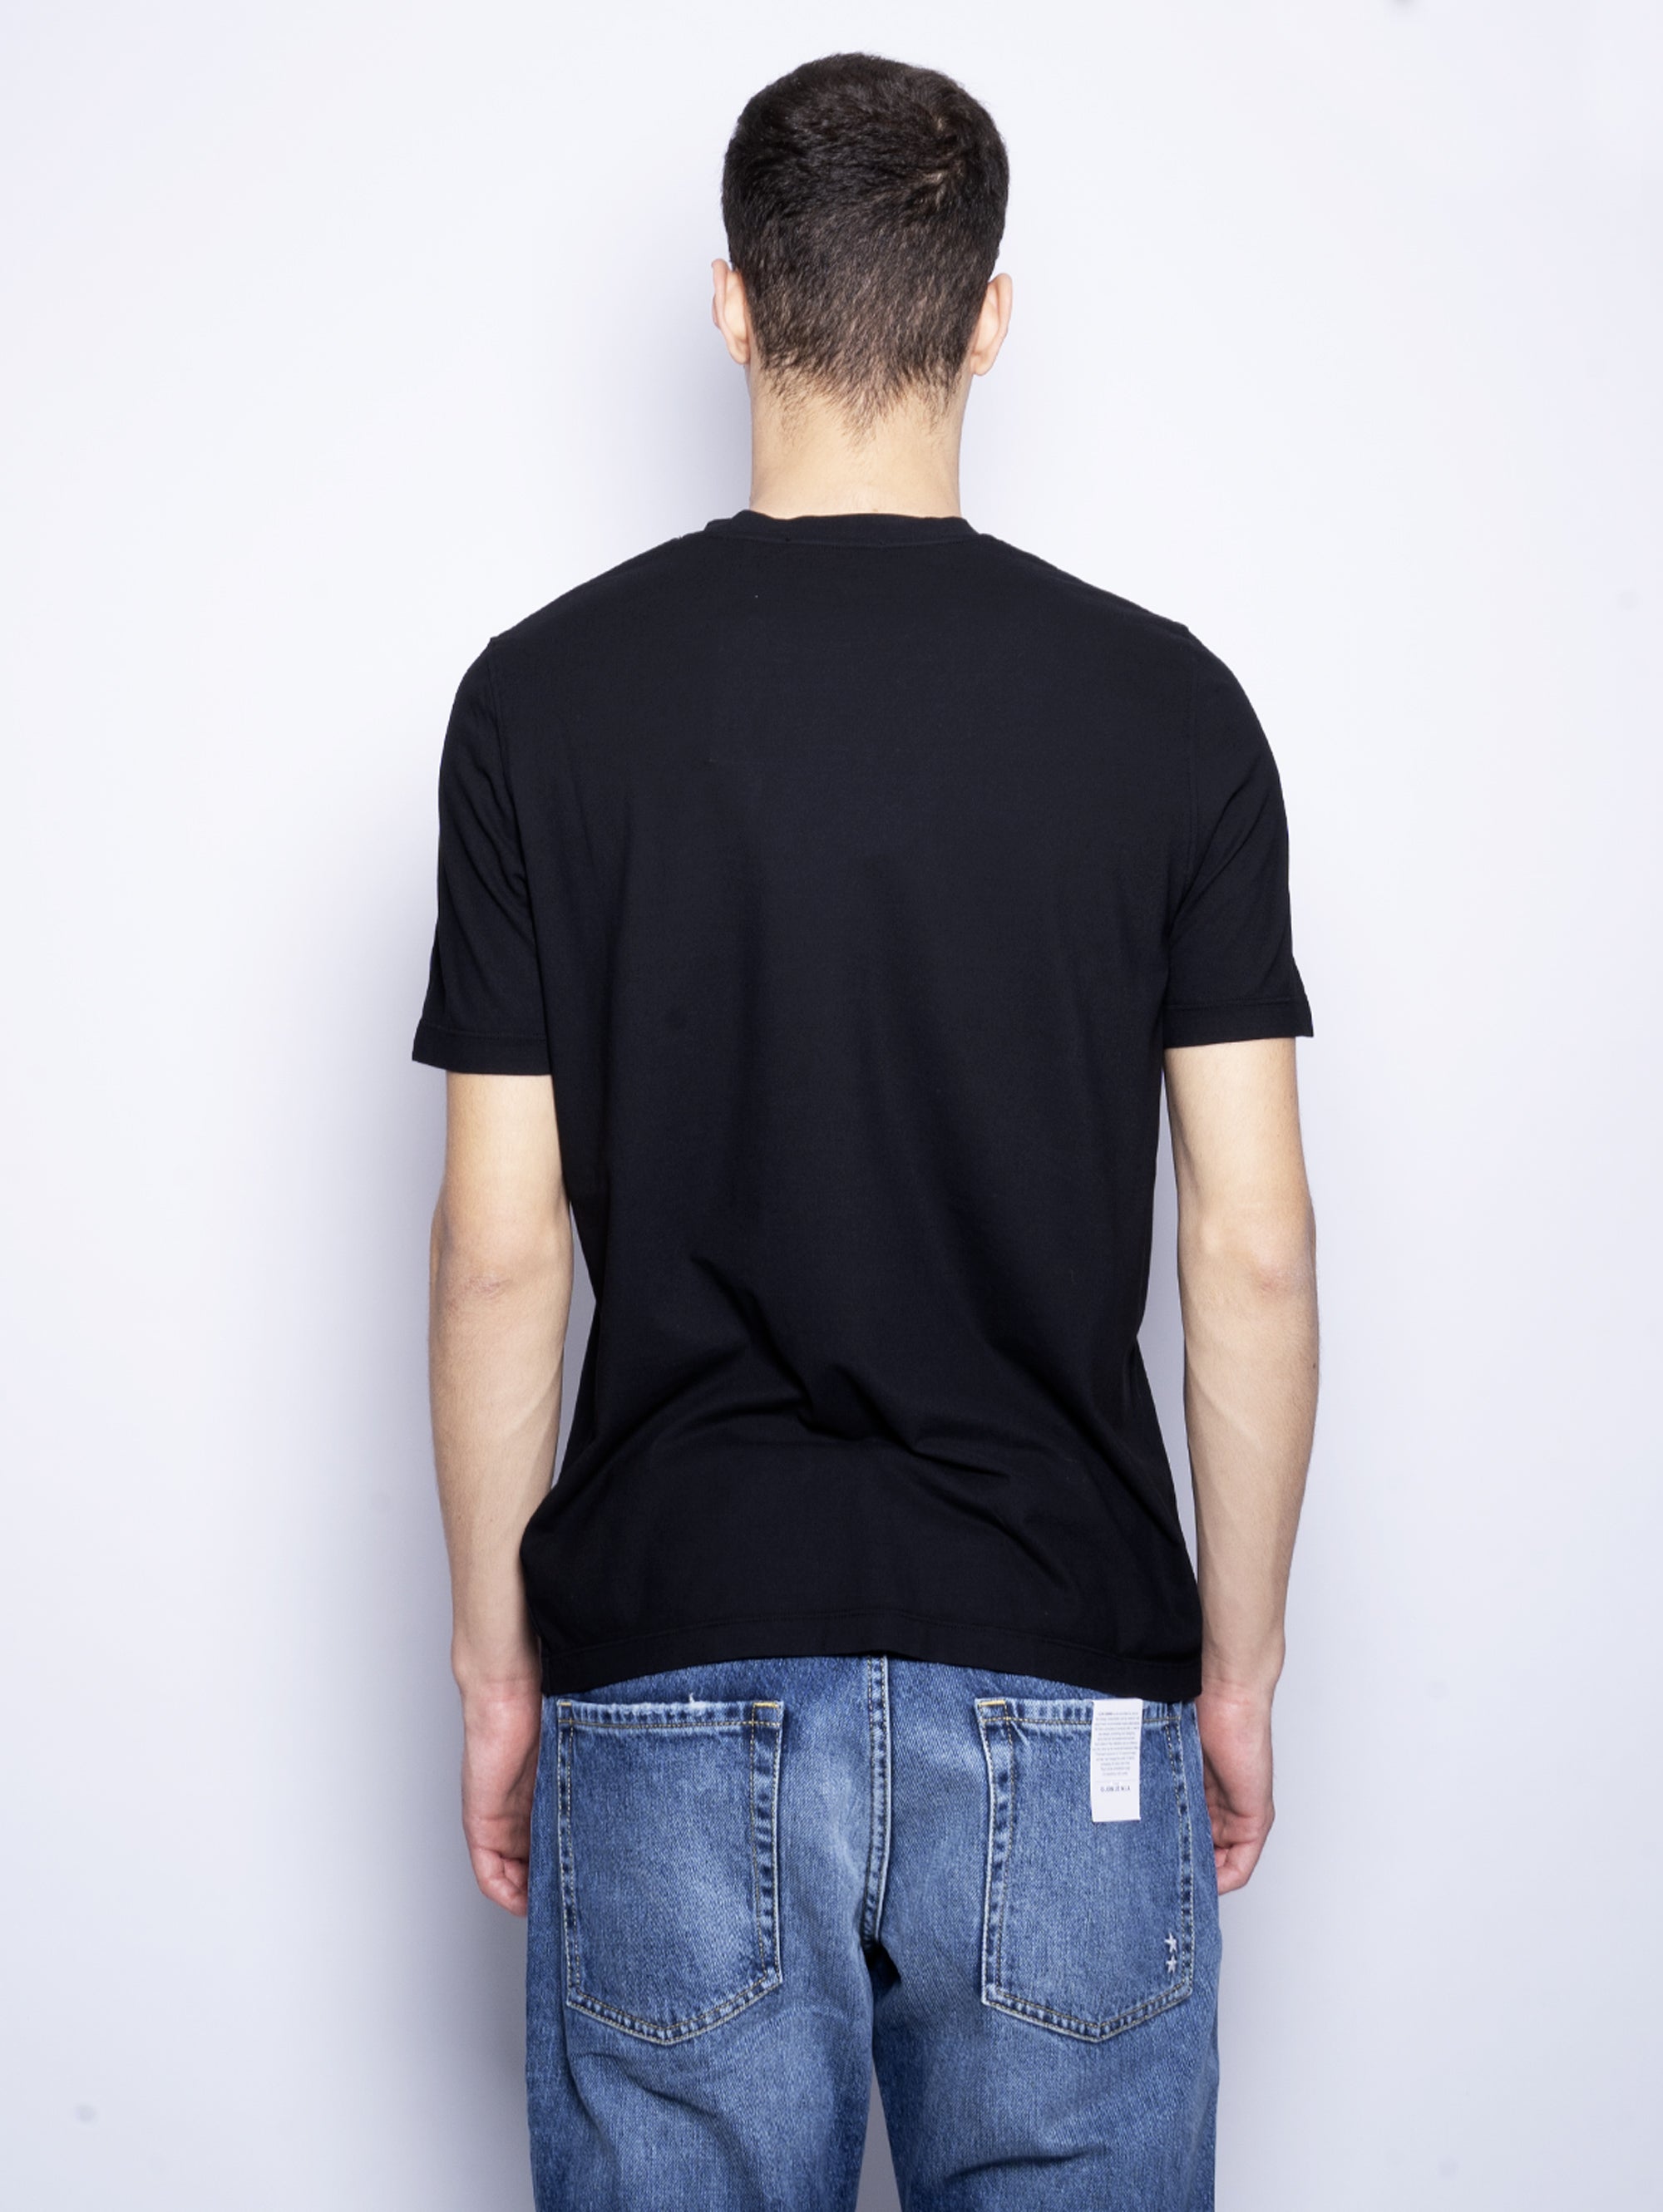 Short Sleeves T-shirt in Black Ice Cotton